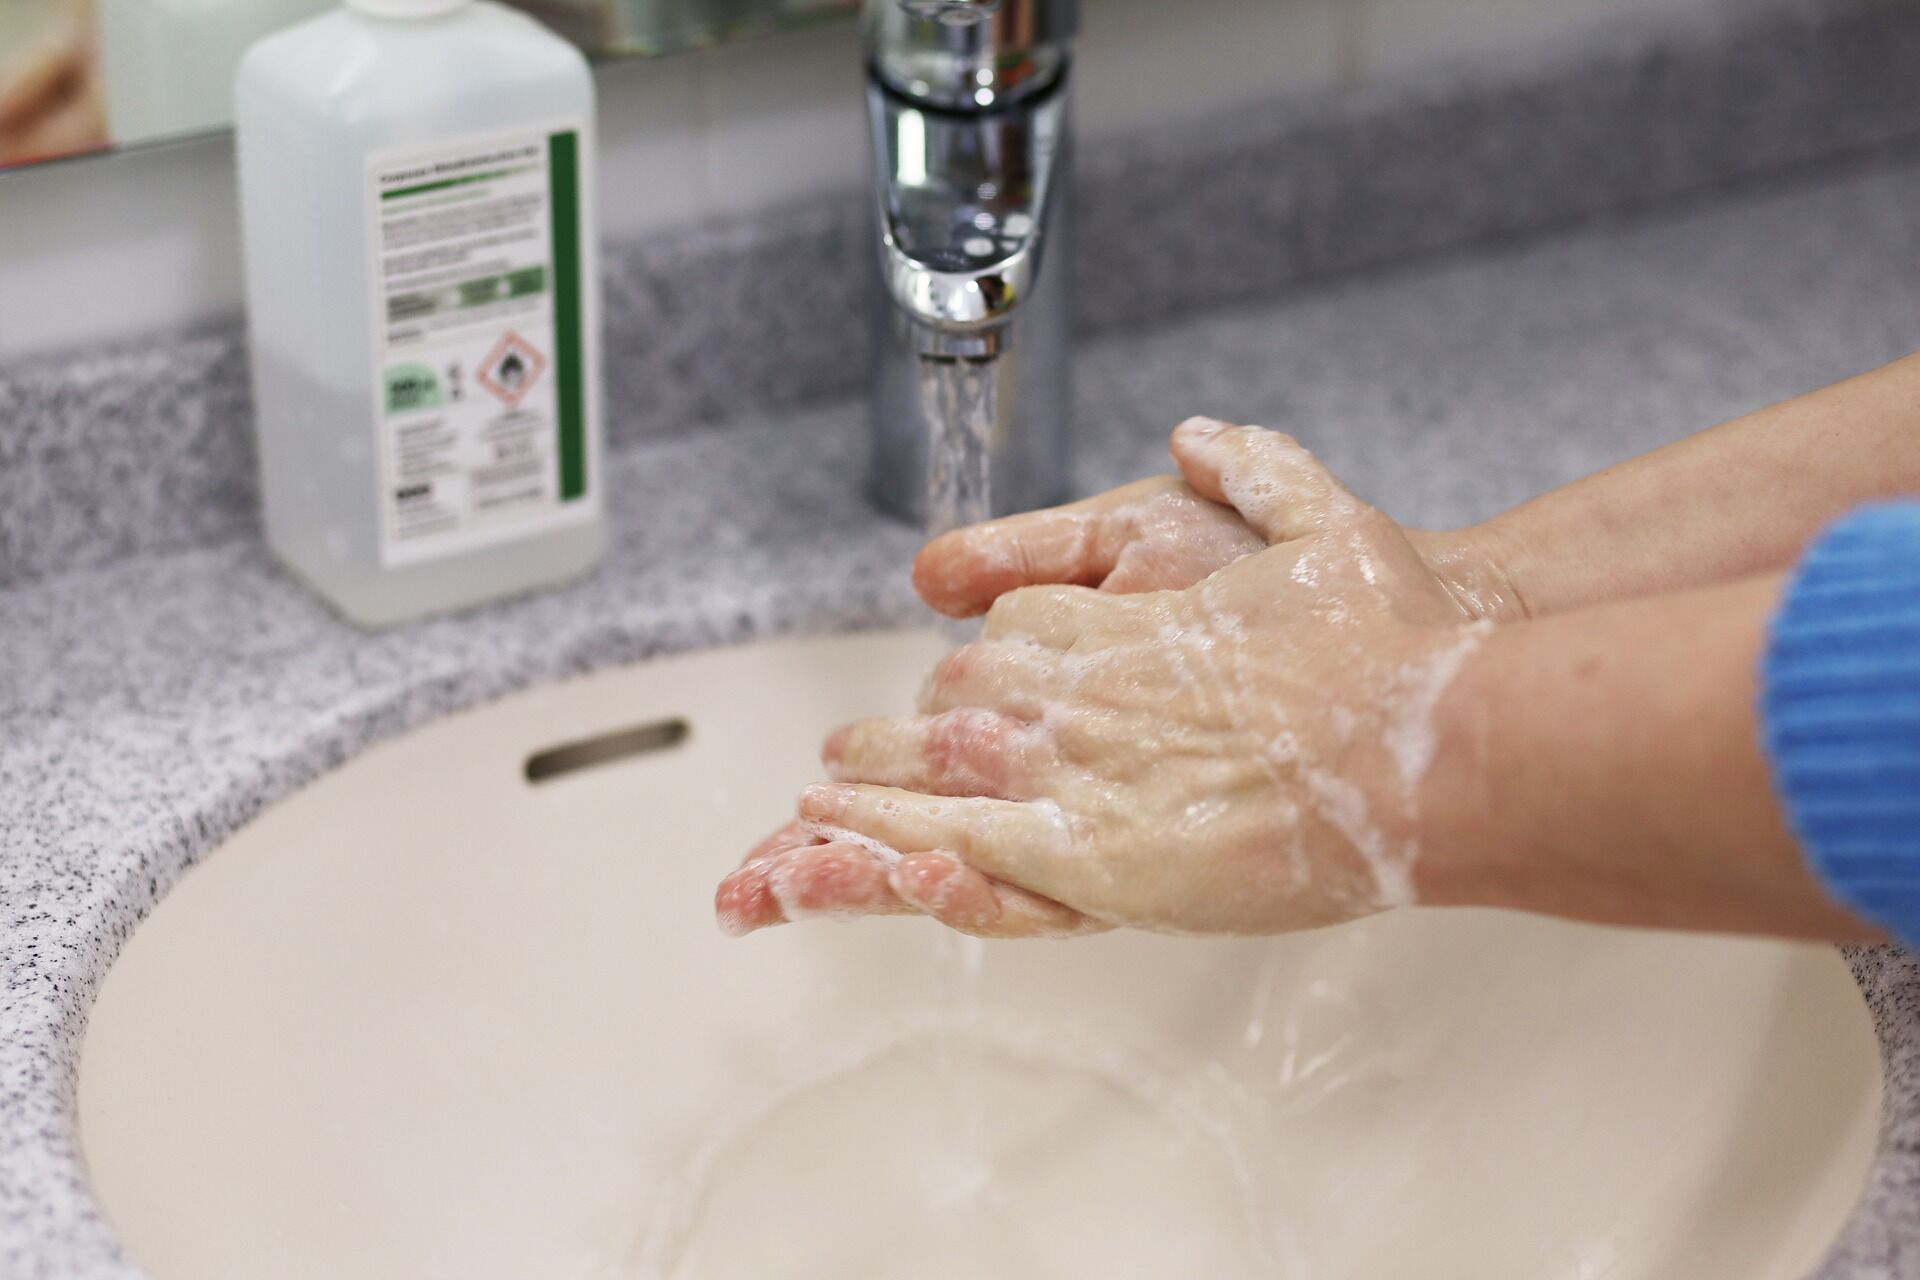 Warm water and soap will help remove superglue from the skin.